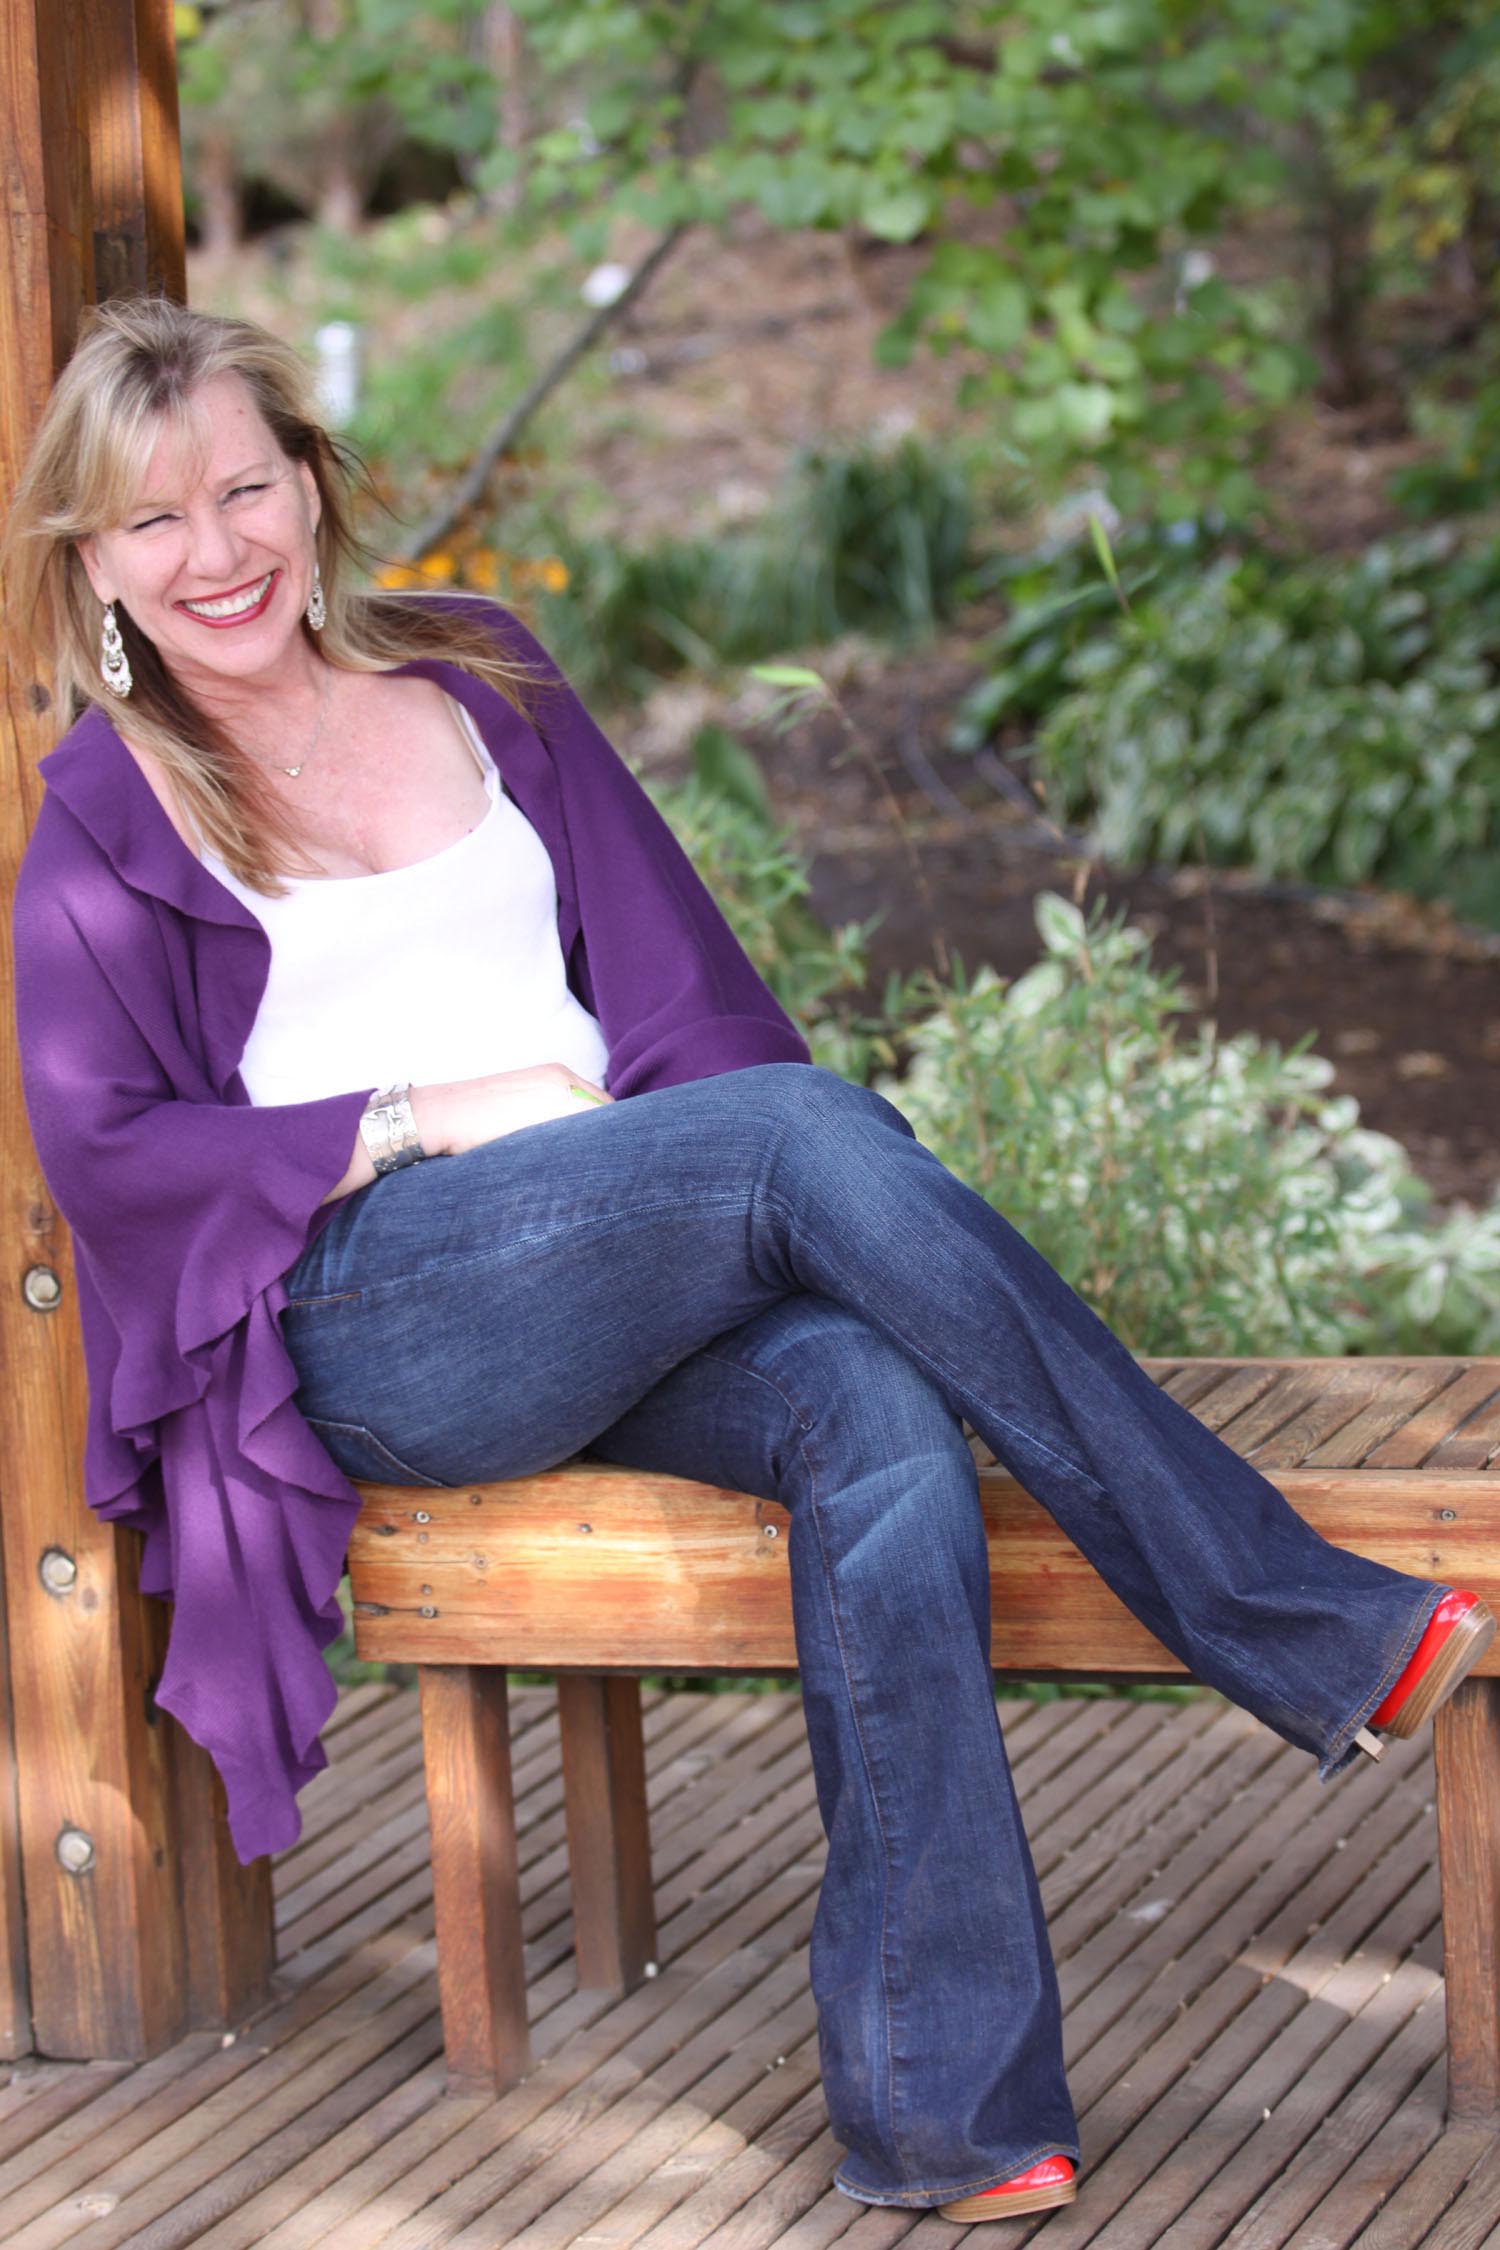 a white woman sits on a bench with her legs crossed and smiling